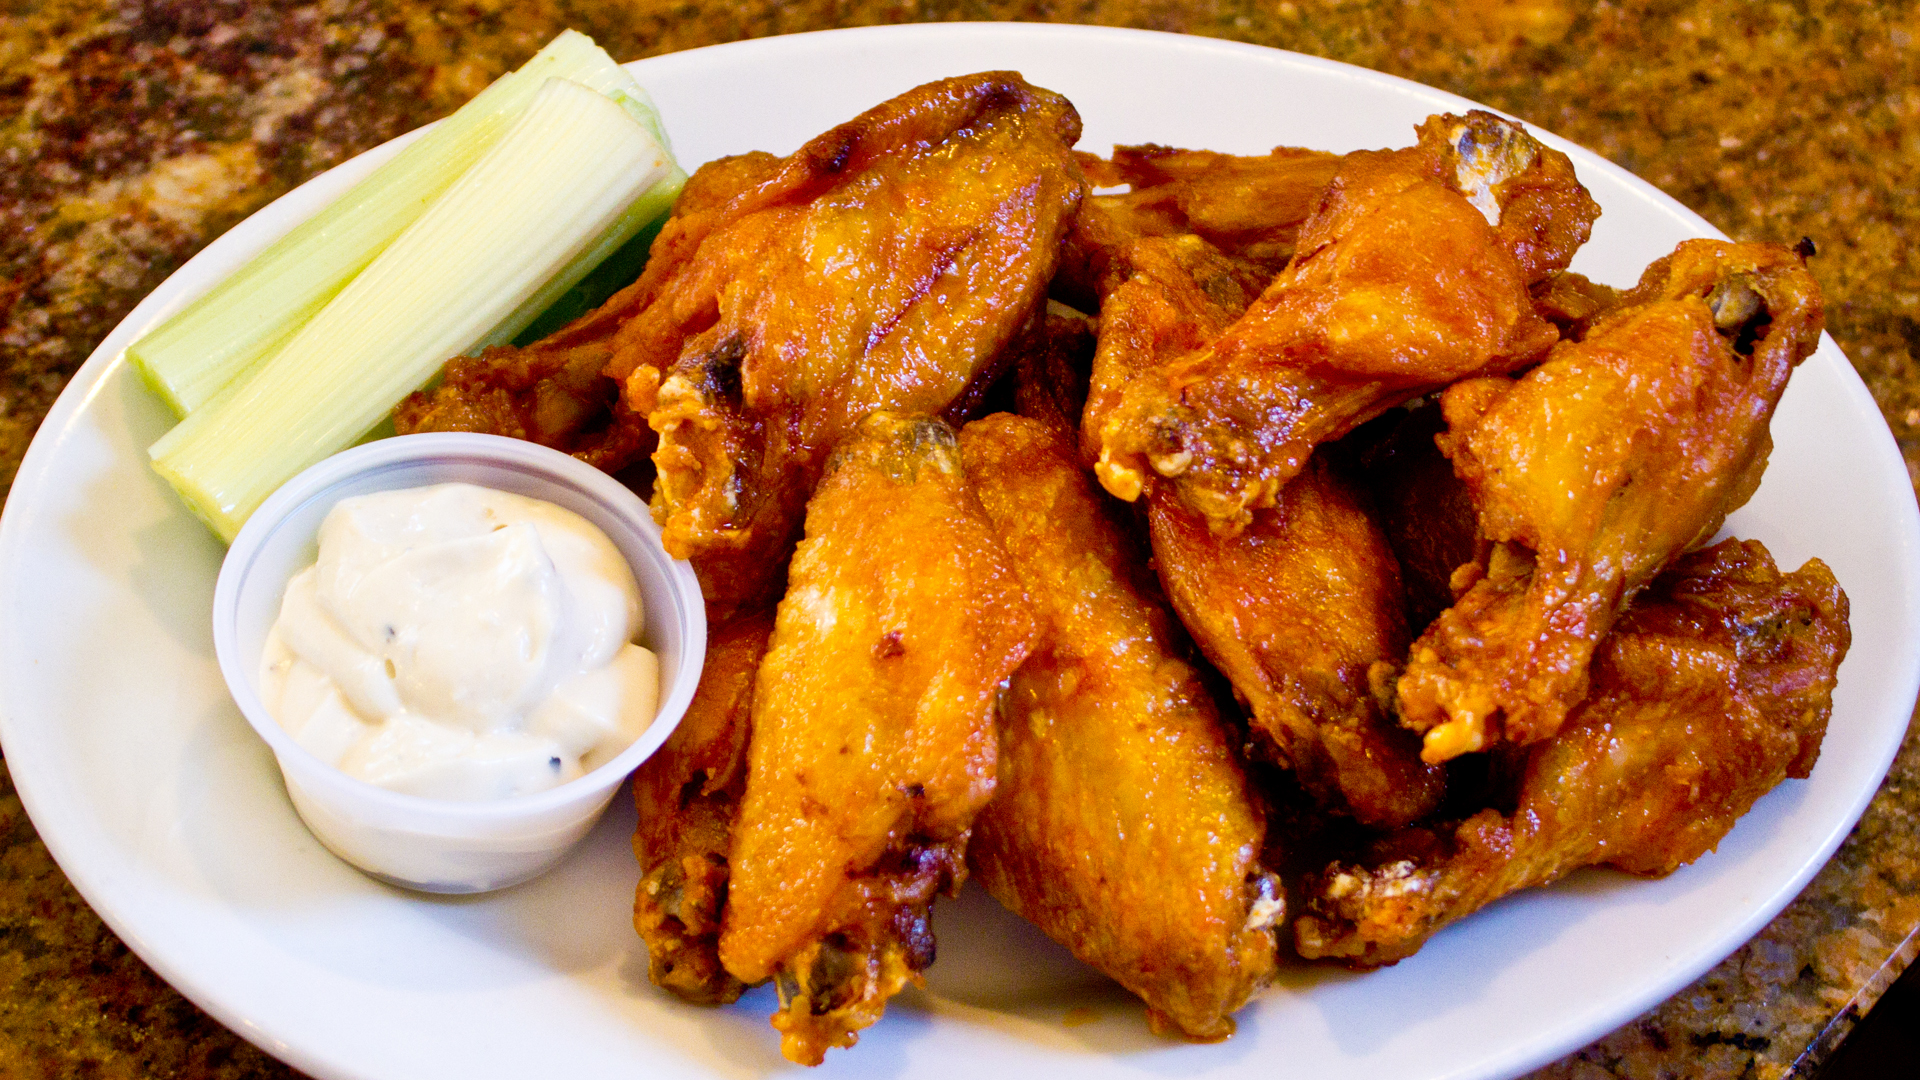 Try our wings and taste the difference!